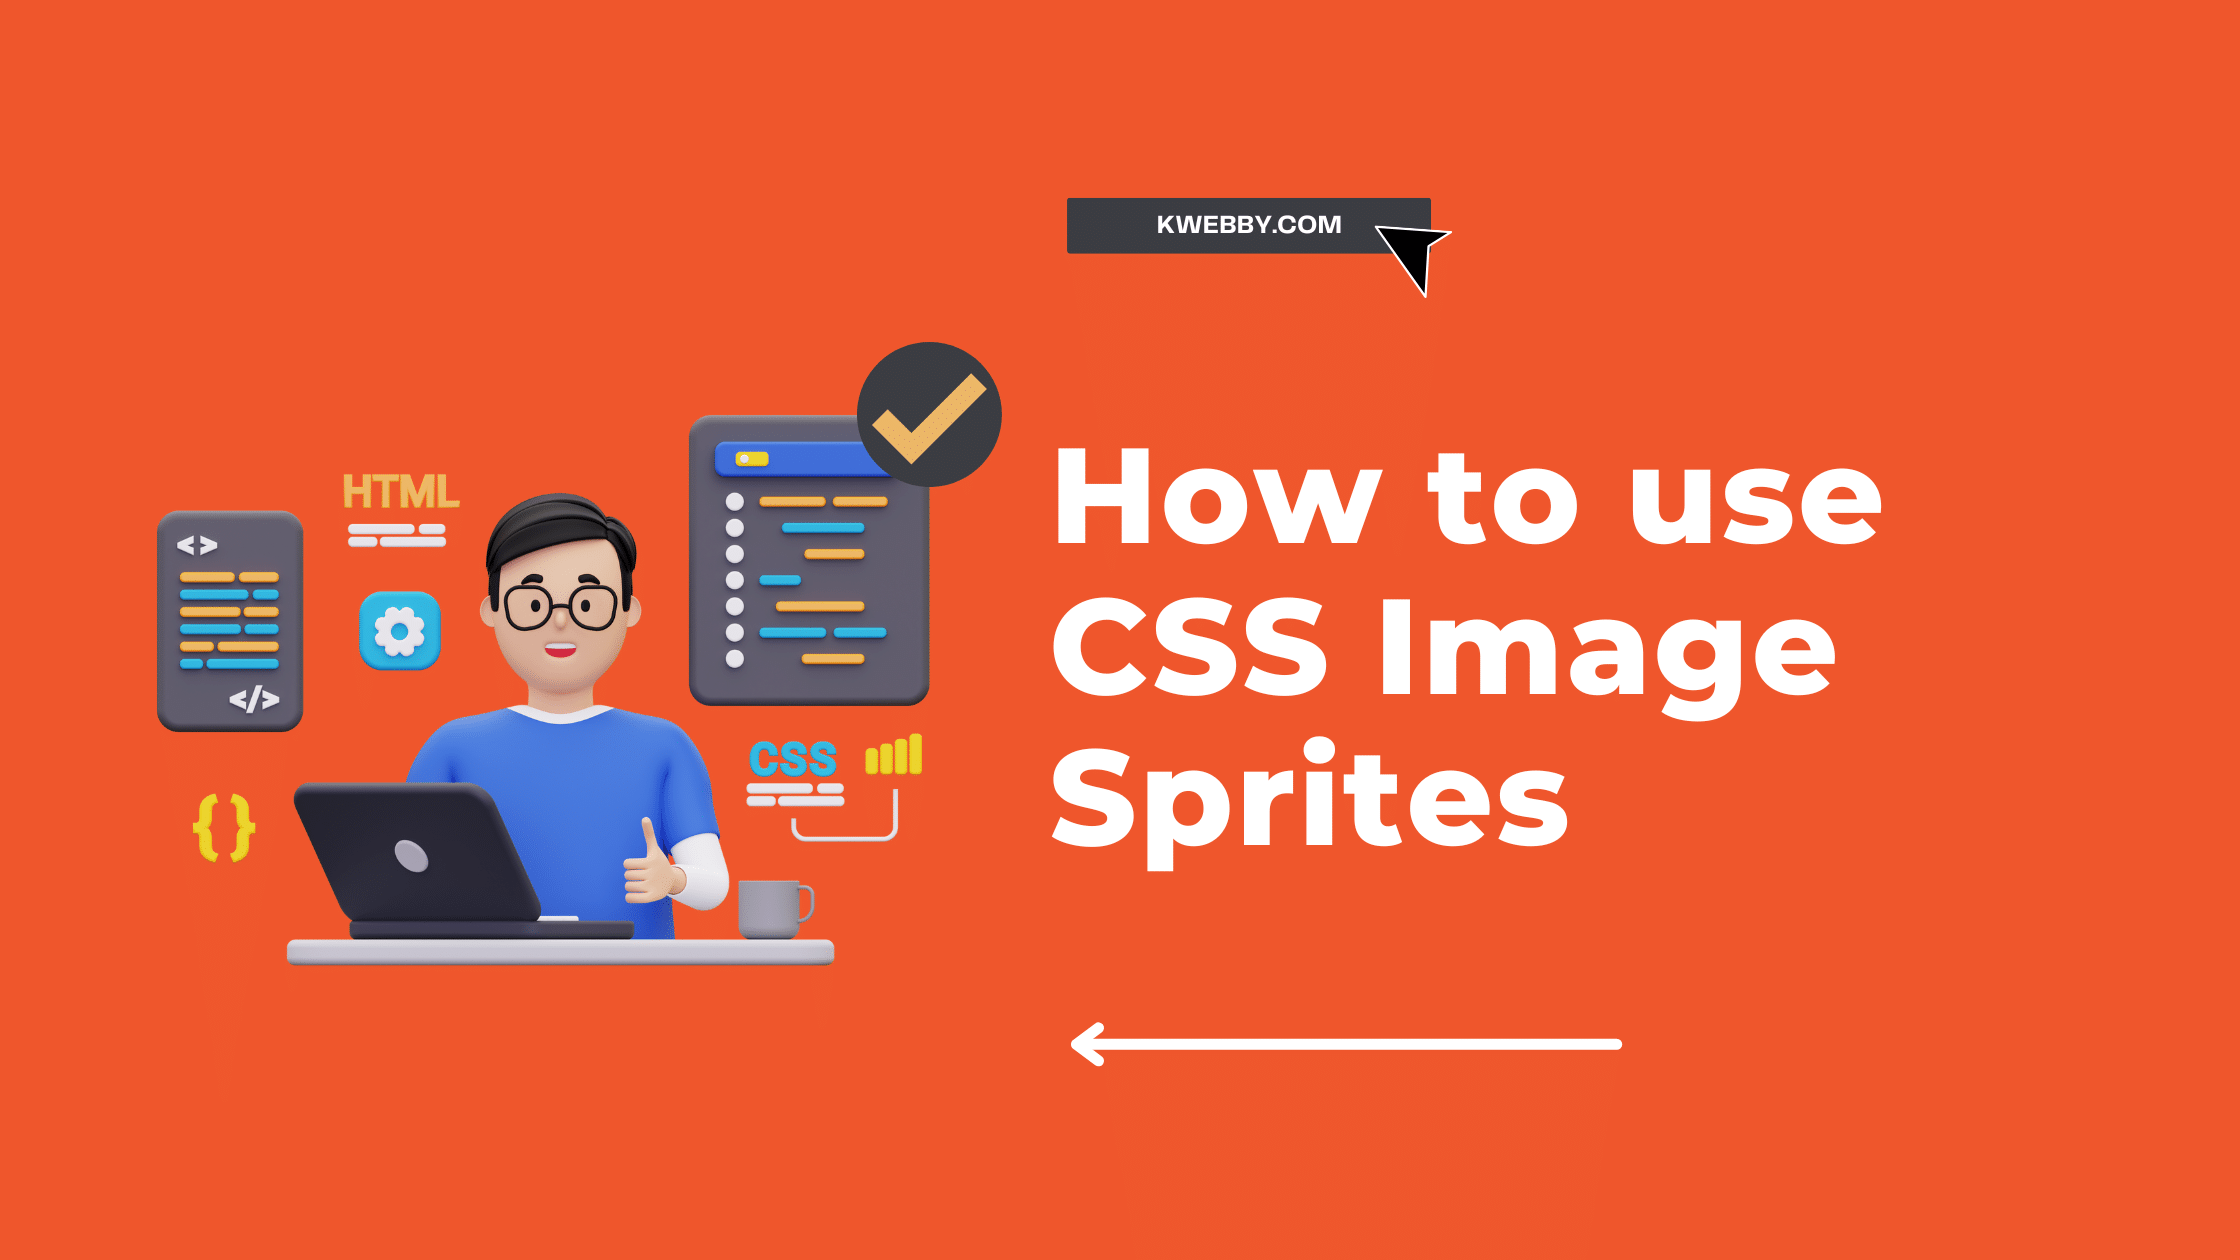 How to use CSS Image Sprites